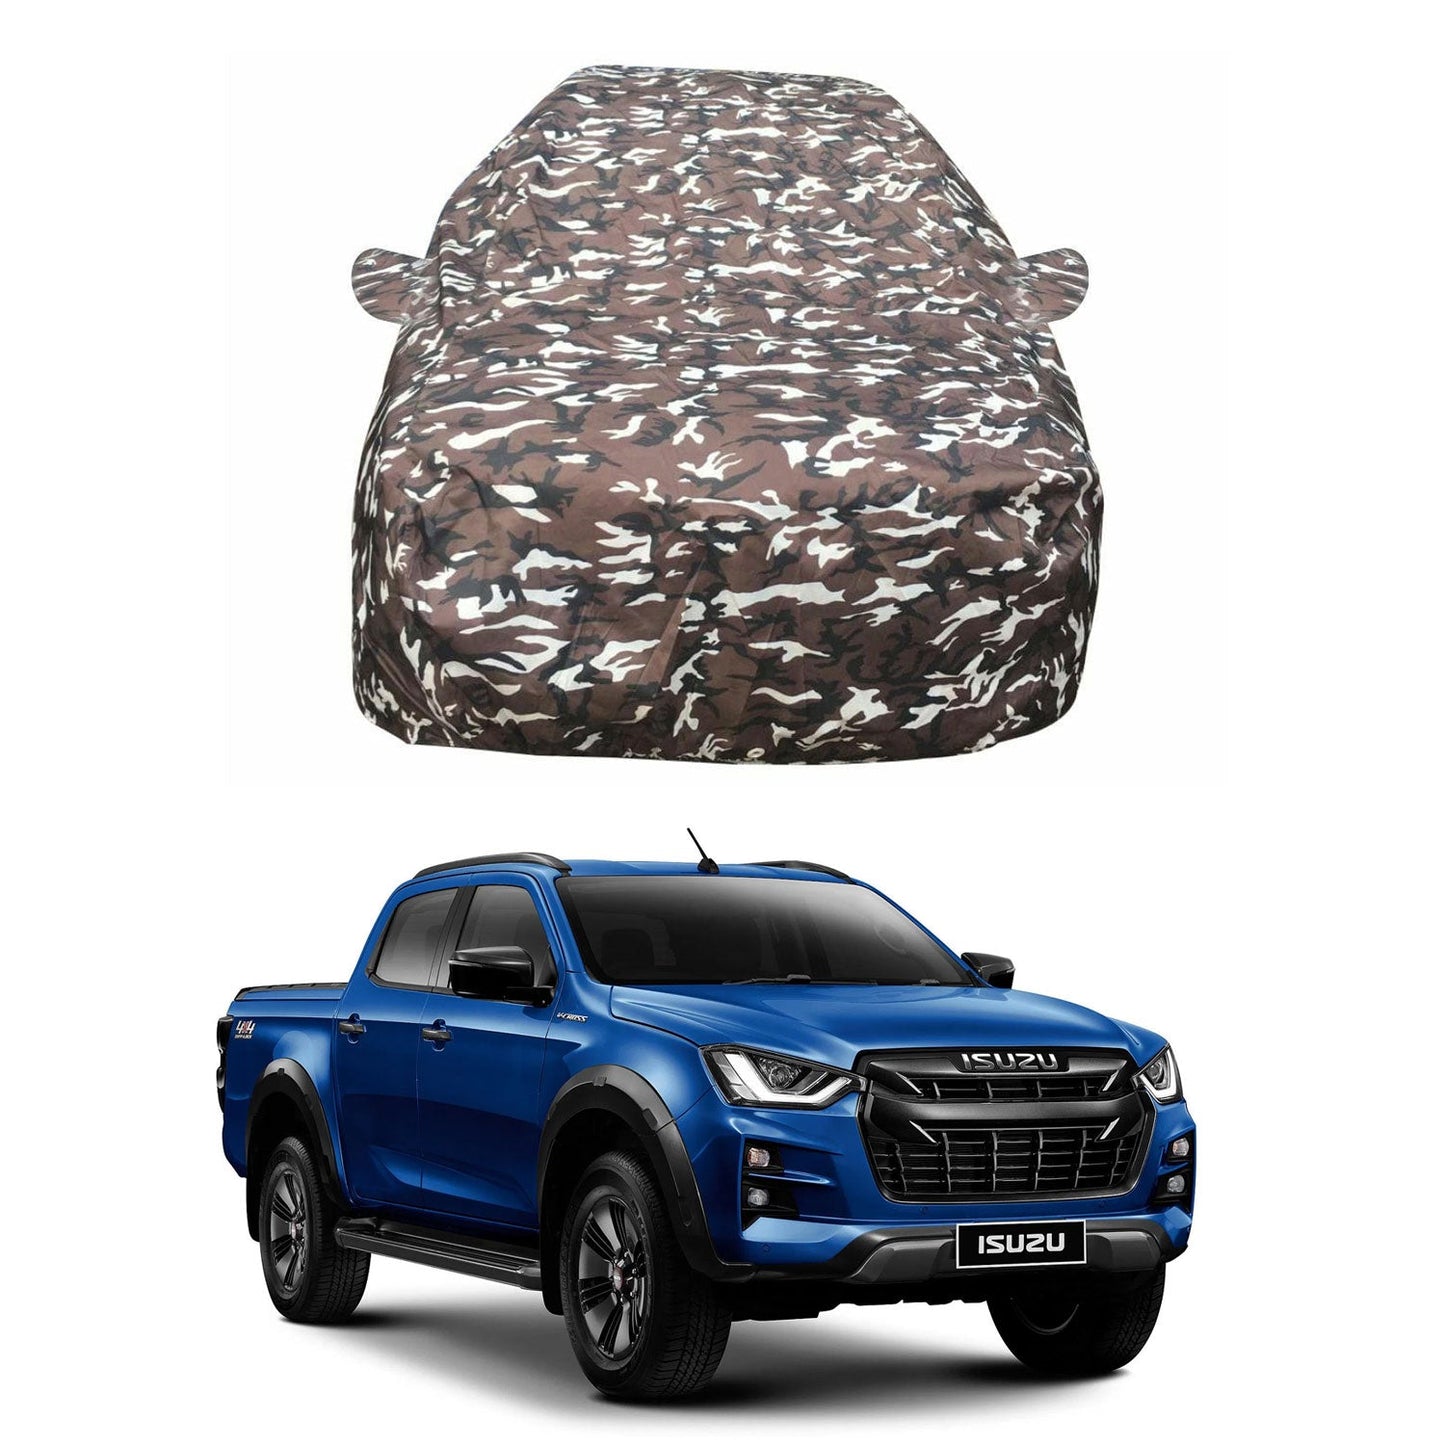 Oshotto Ranger Design Made of 100% Waterproof Fabric Car Body Cover with Mirror Pockets For Isuzu D-Max V-Cross